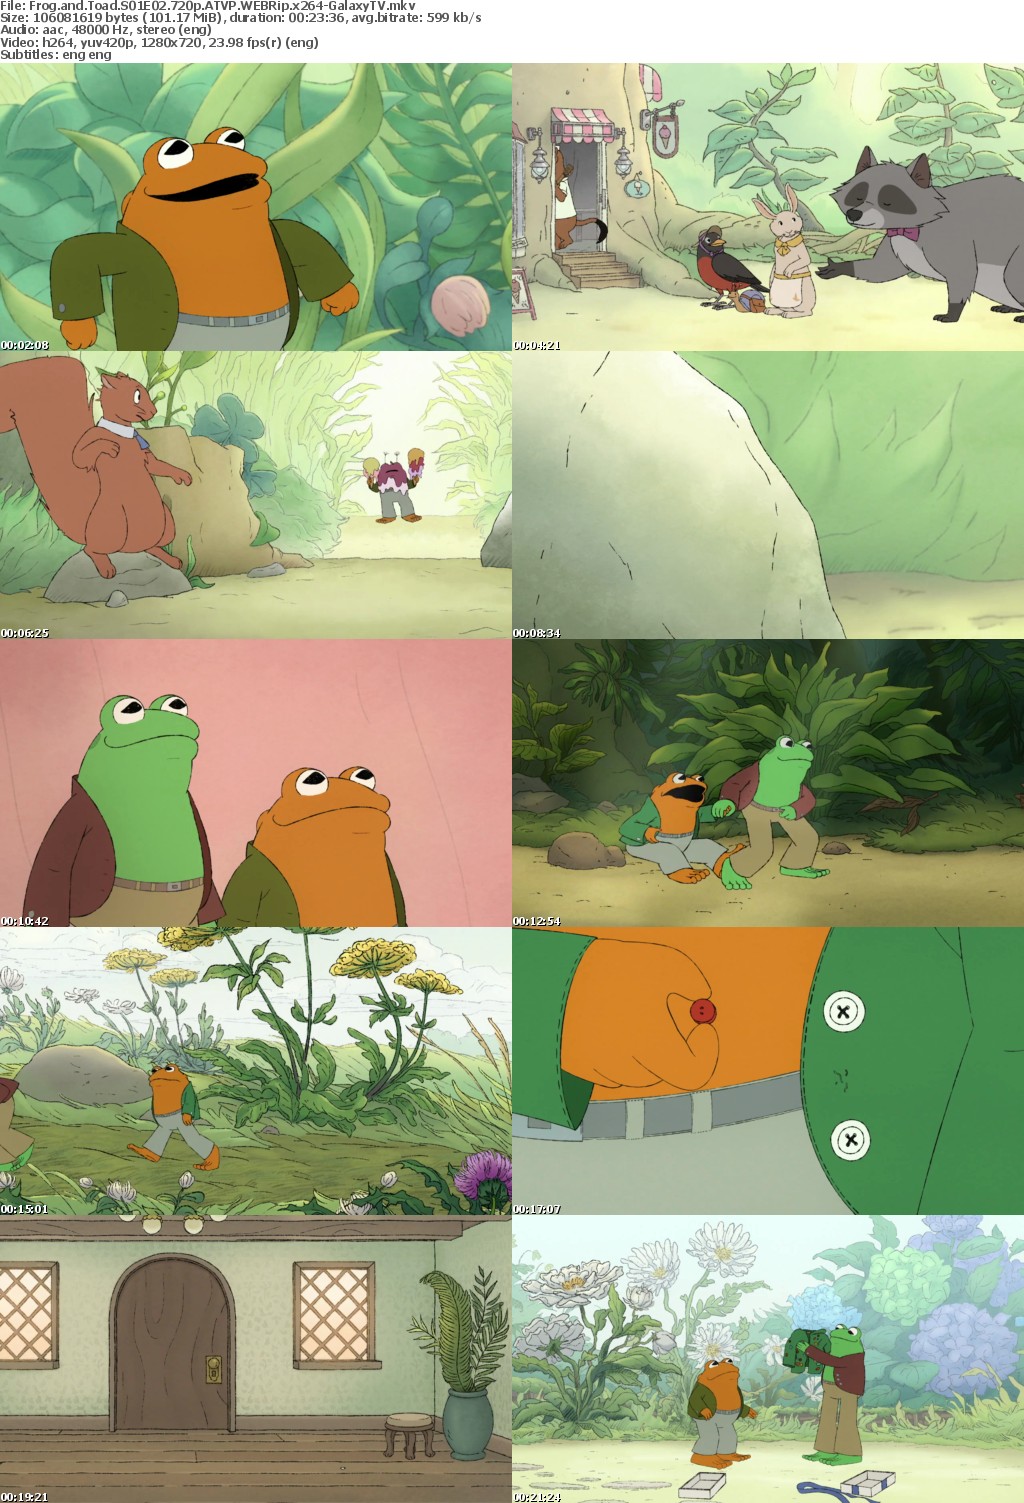 Frog and Toad S01 COMPLETE 720p ATVP WEBRip x264-GalaxyTV